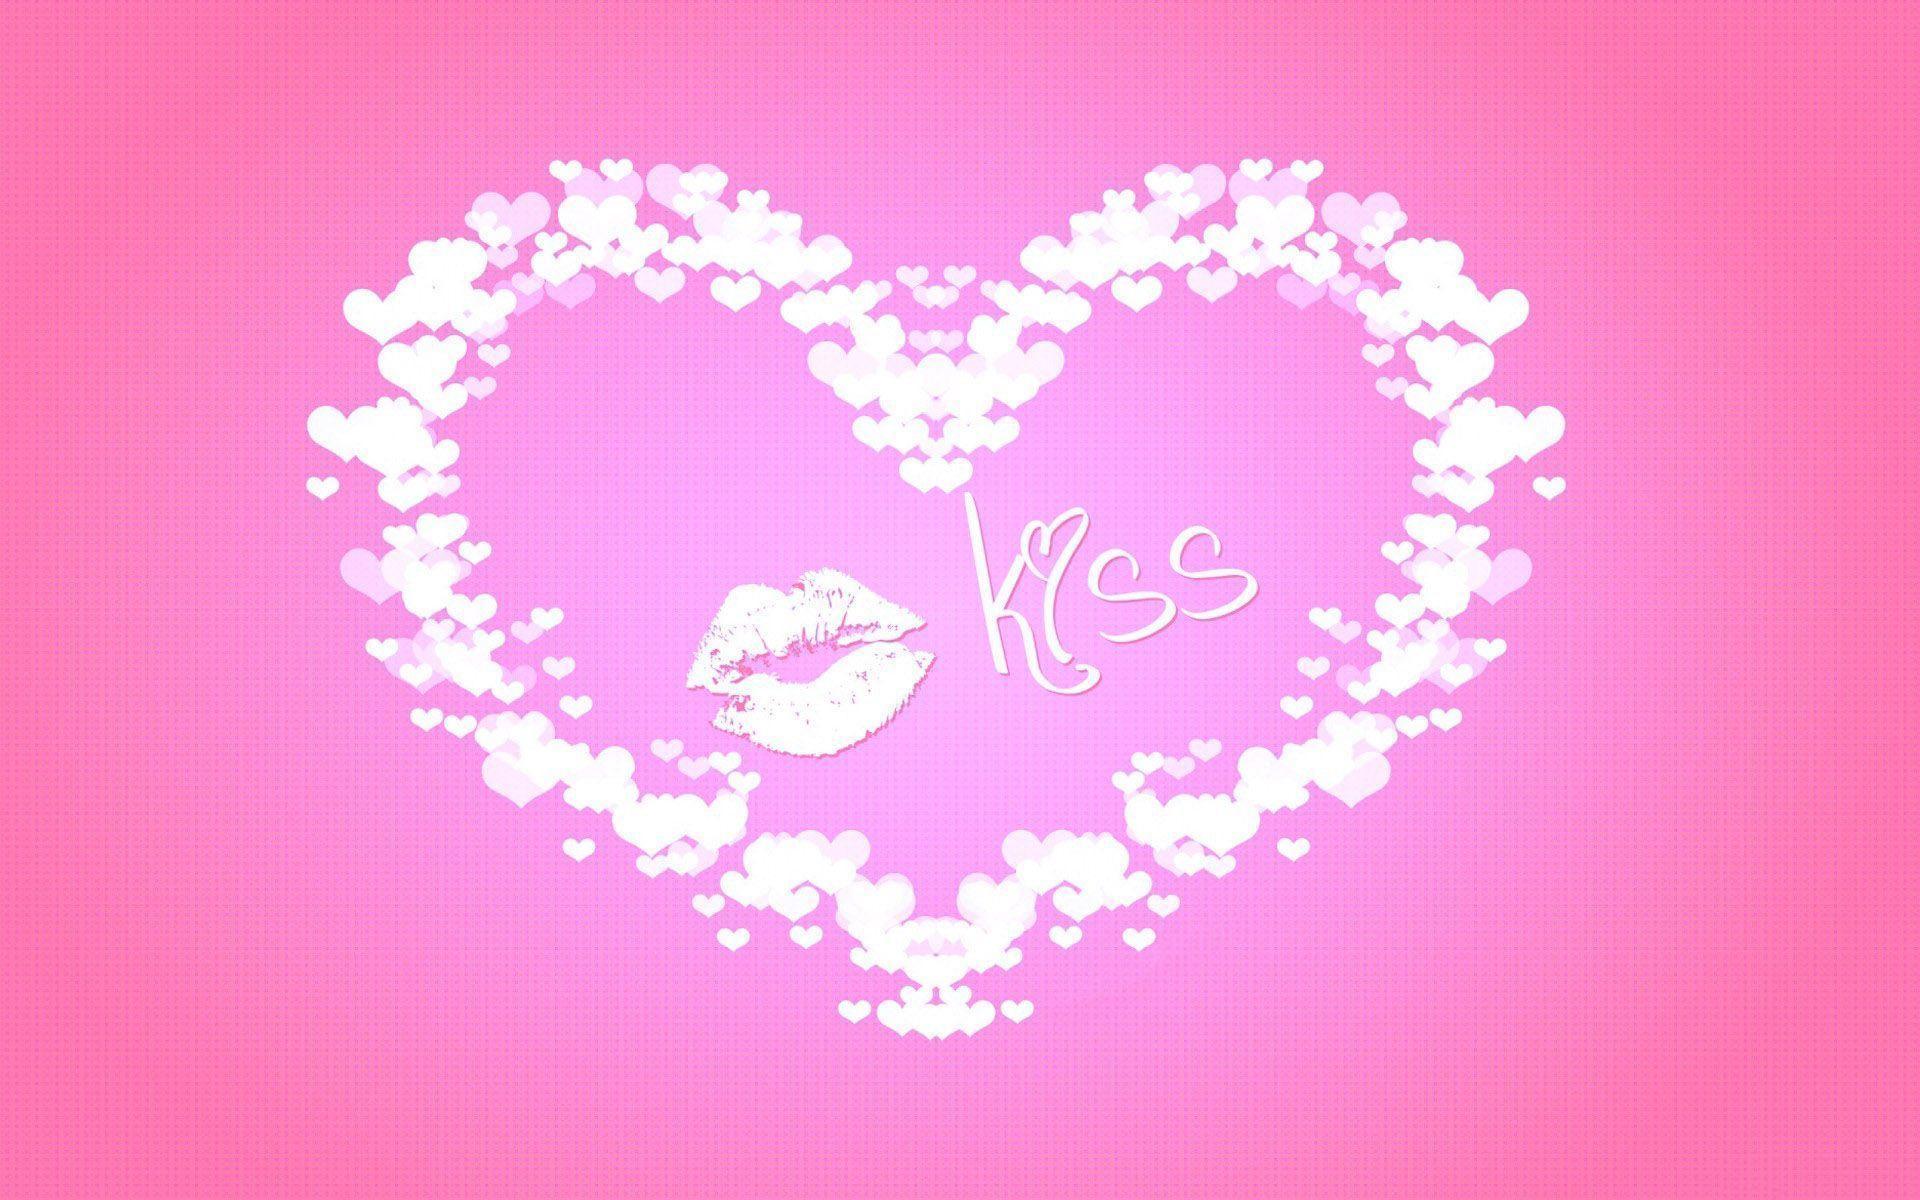 Valentines Day 2015 Pink Kiss Wallpaper Wide or HD. Holidays